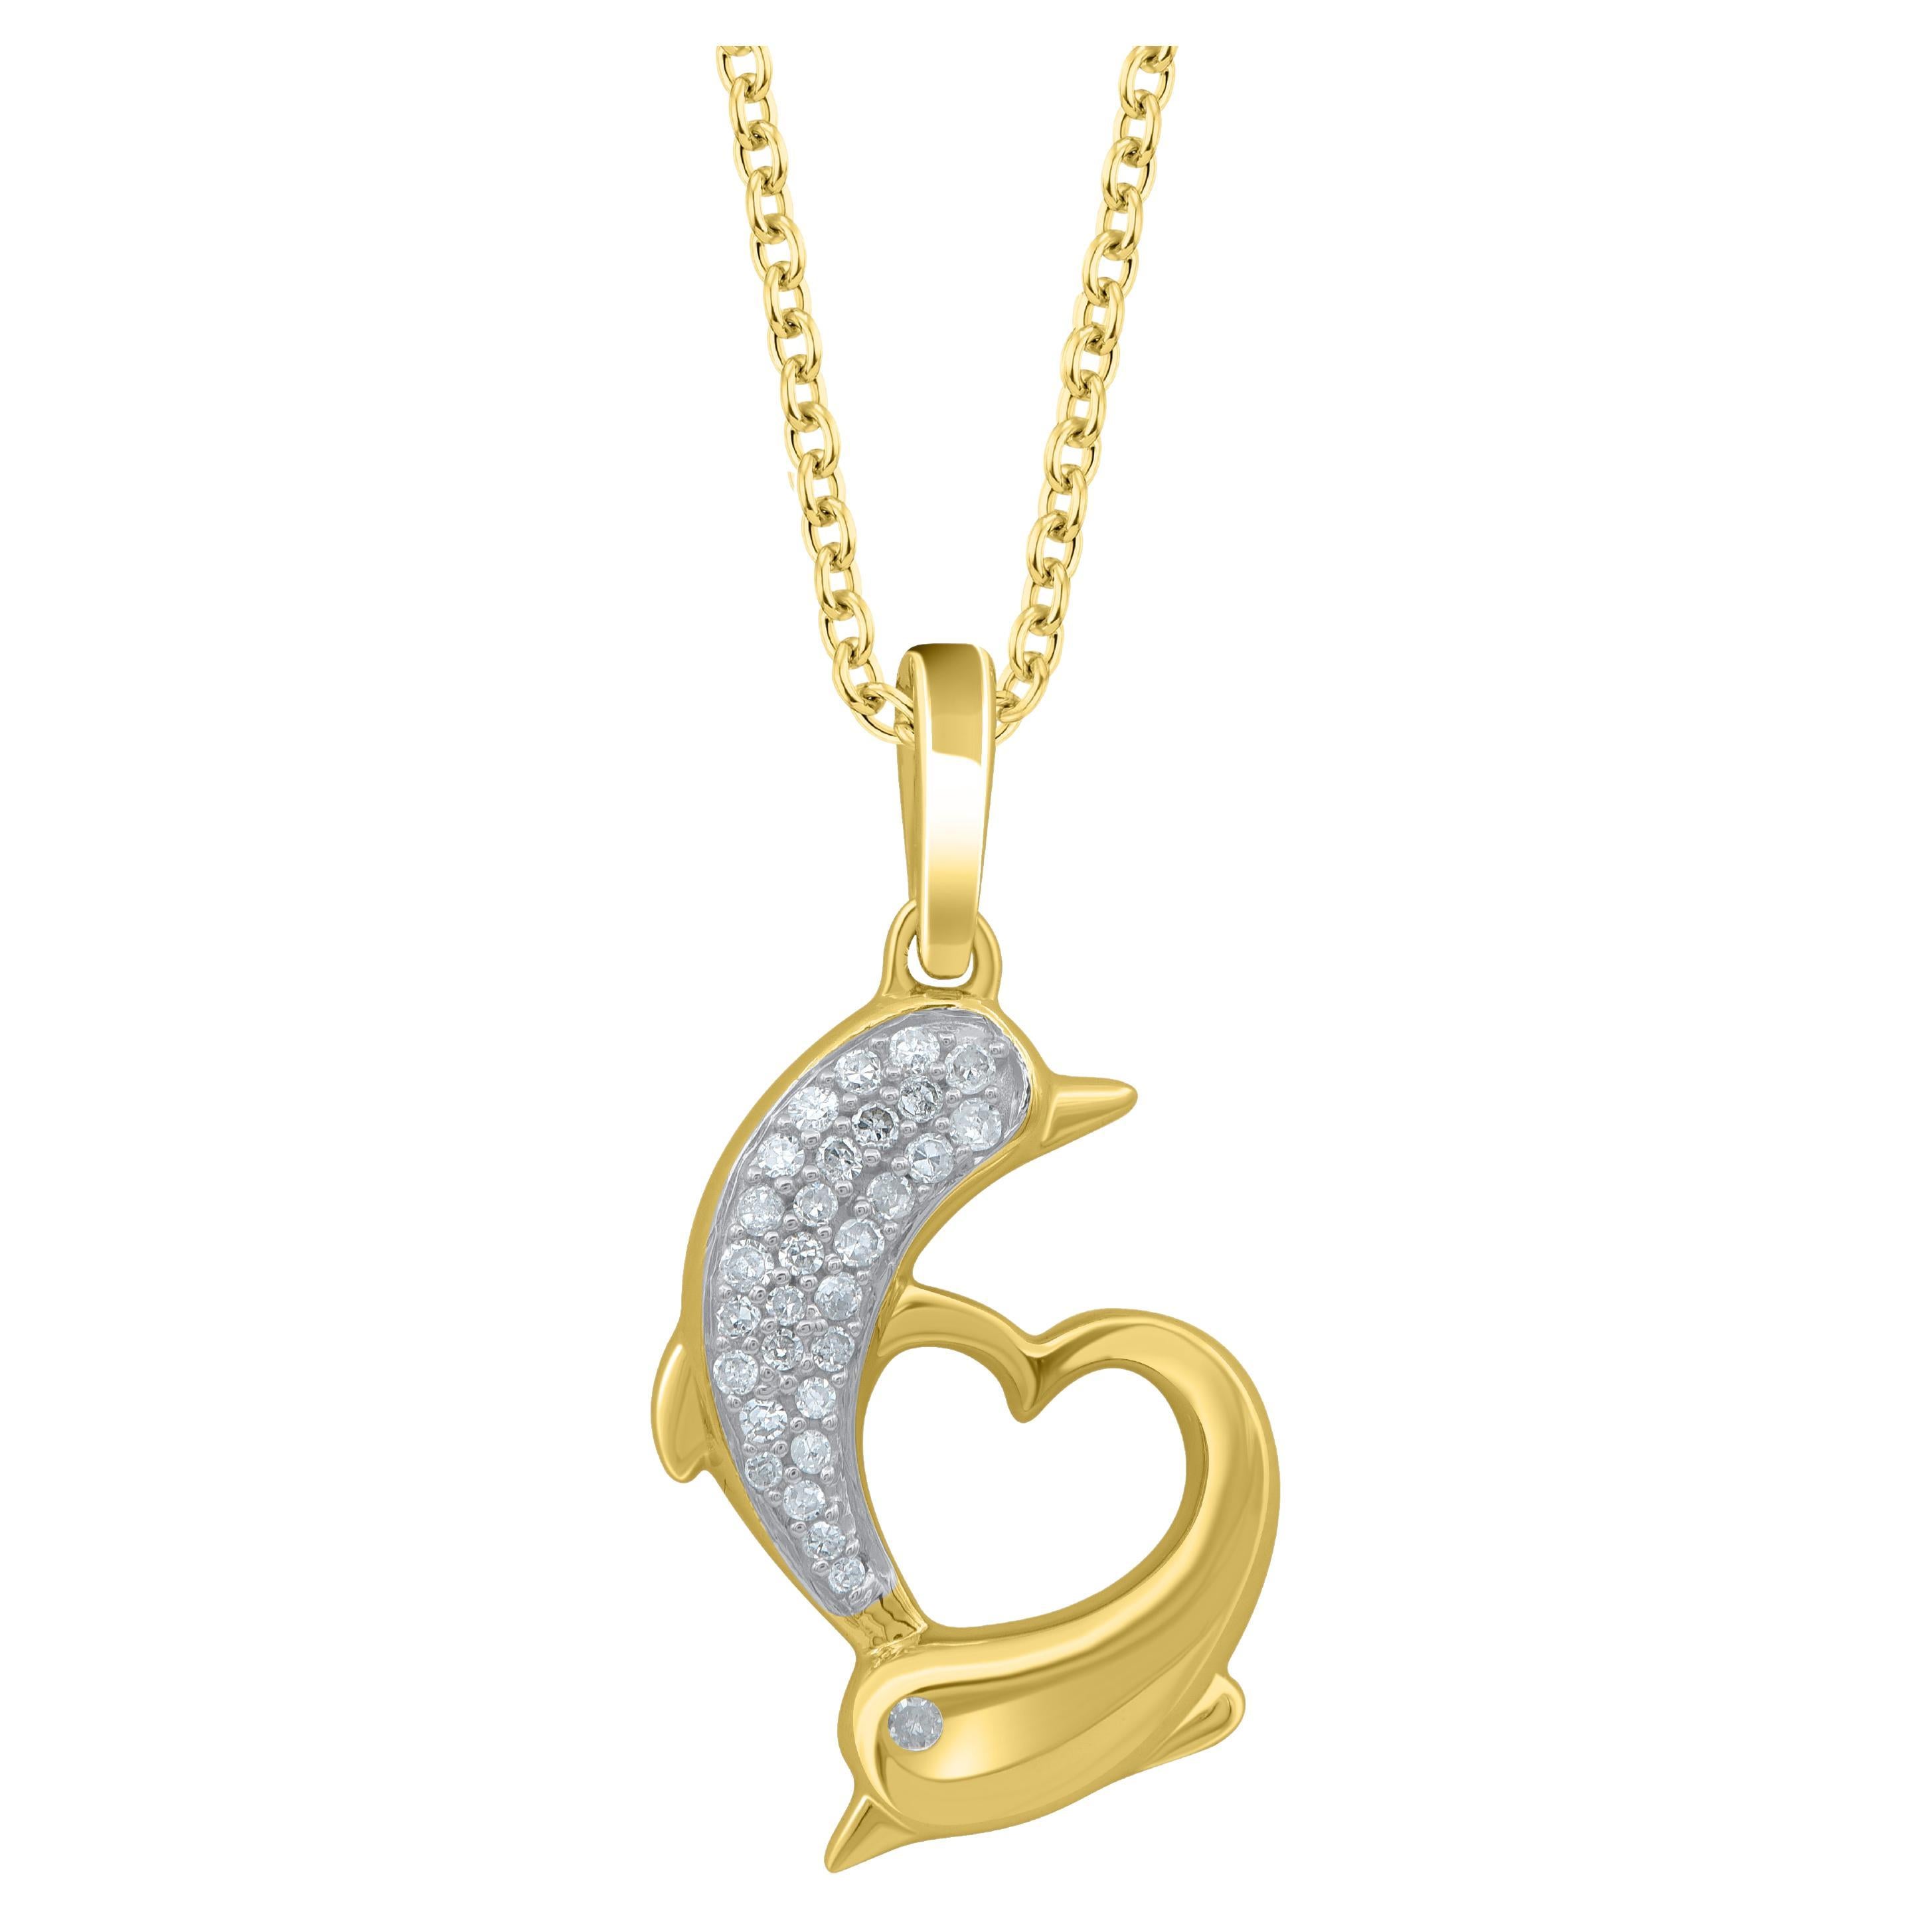 TJD 0.10 Carat Natural Round Diamond 14KT Yellow Gold Yin Yang Dolphin Pendant For Sale